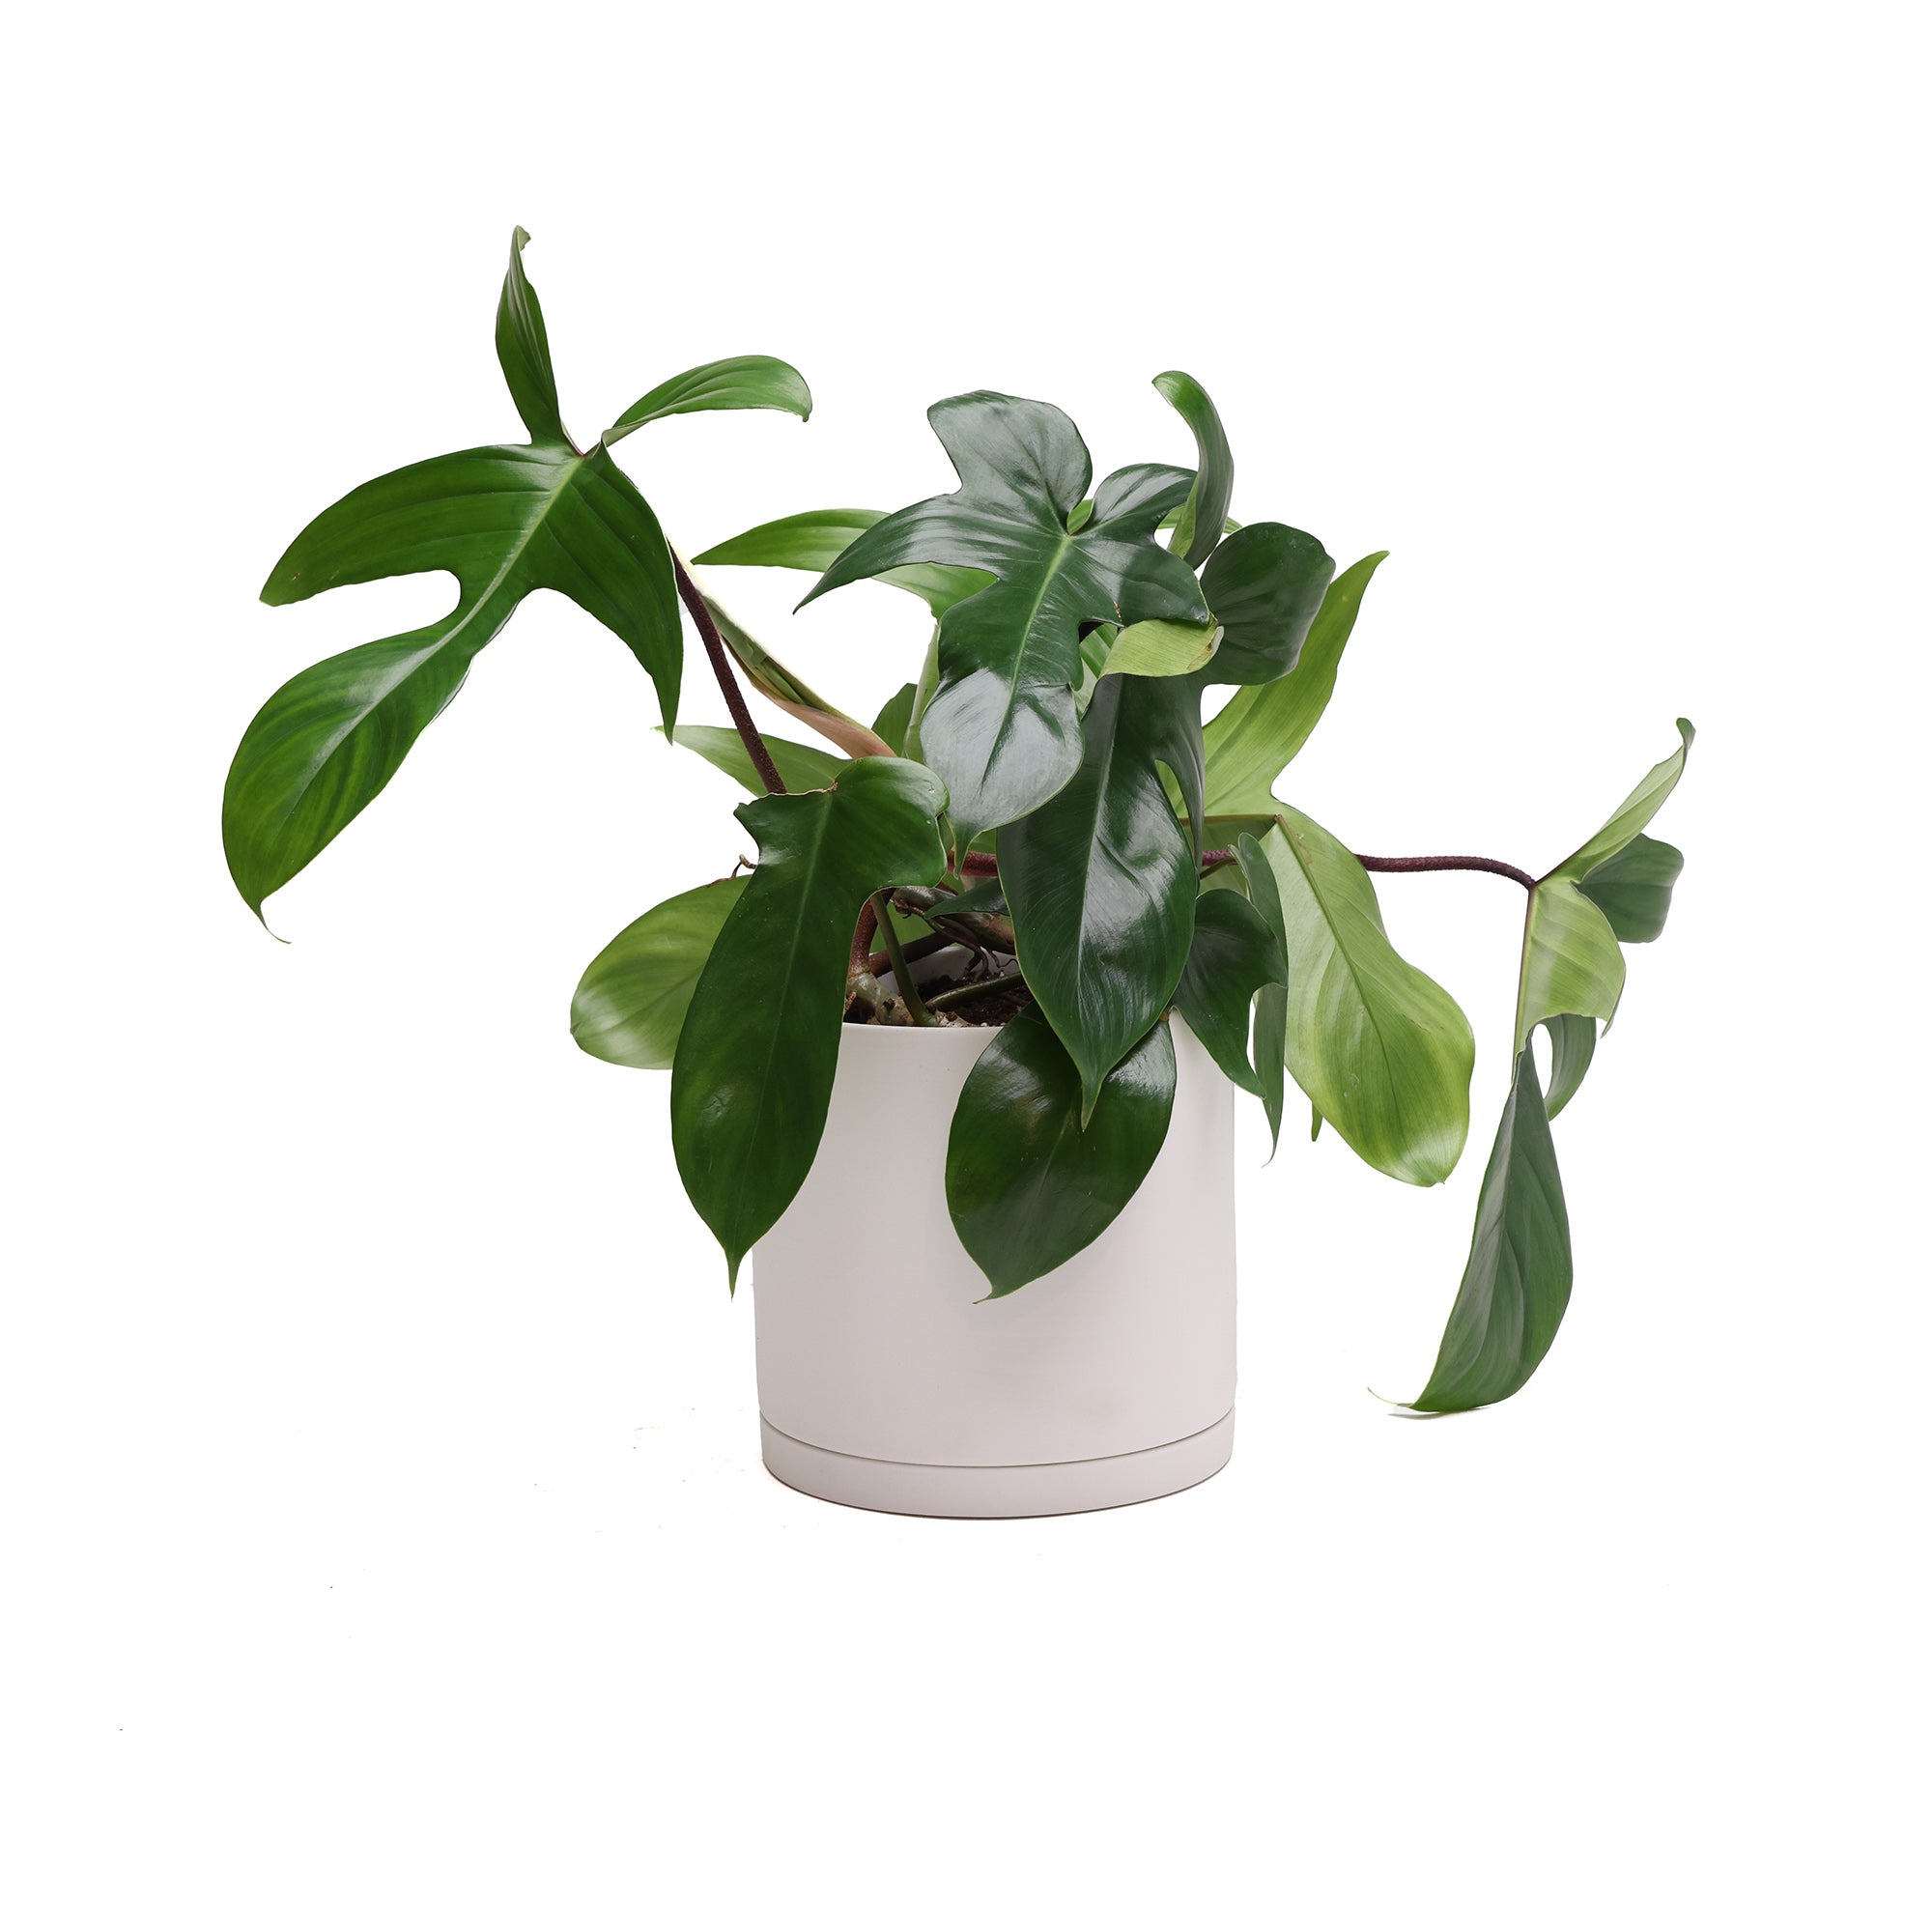 A lush Potted Philodendron Florida Green 6" from Chive Studio with vibrant green leaves, some split and some heart-shaped, potted in a plain white cylindrical container against a white background.